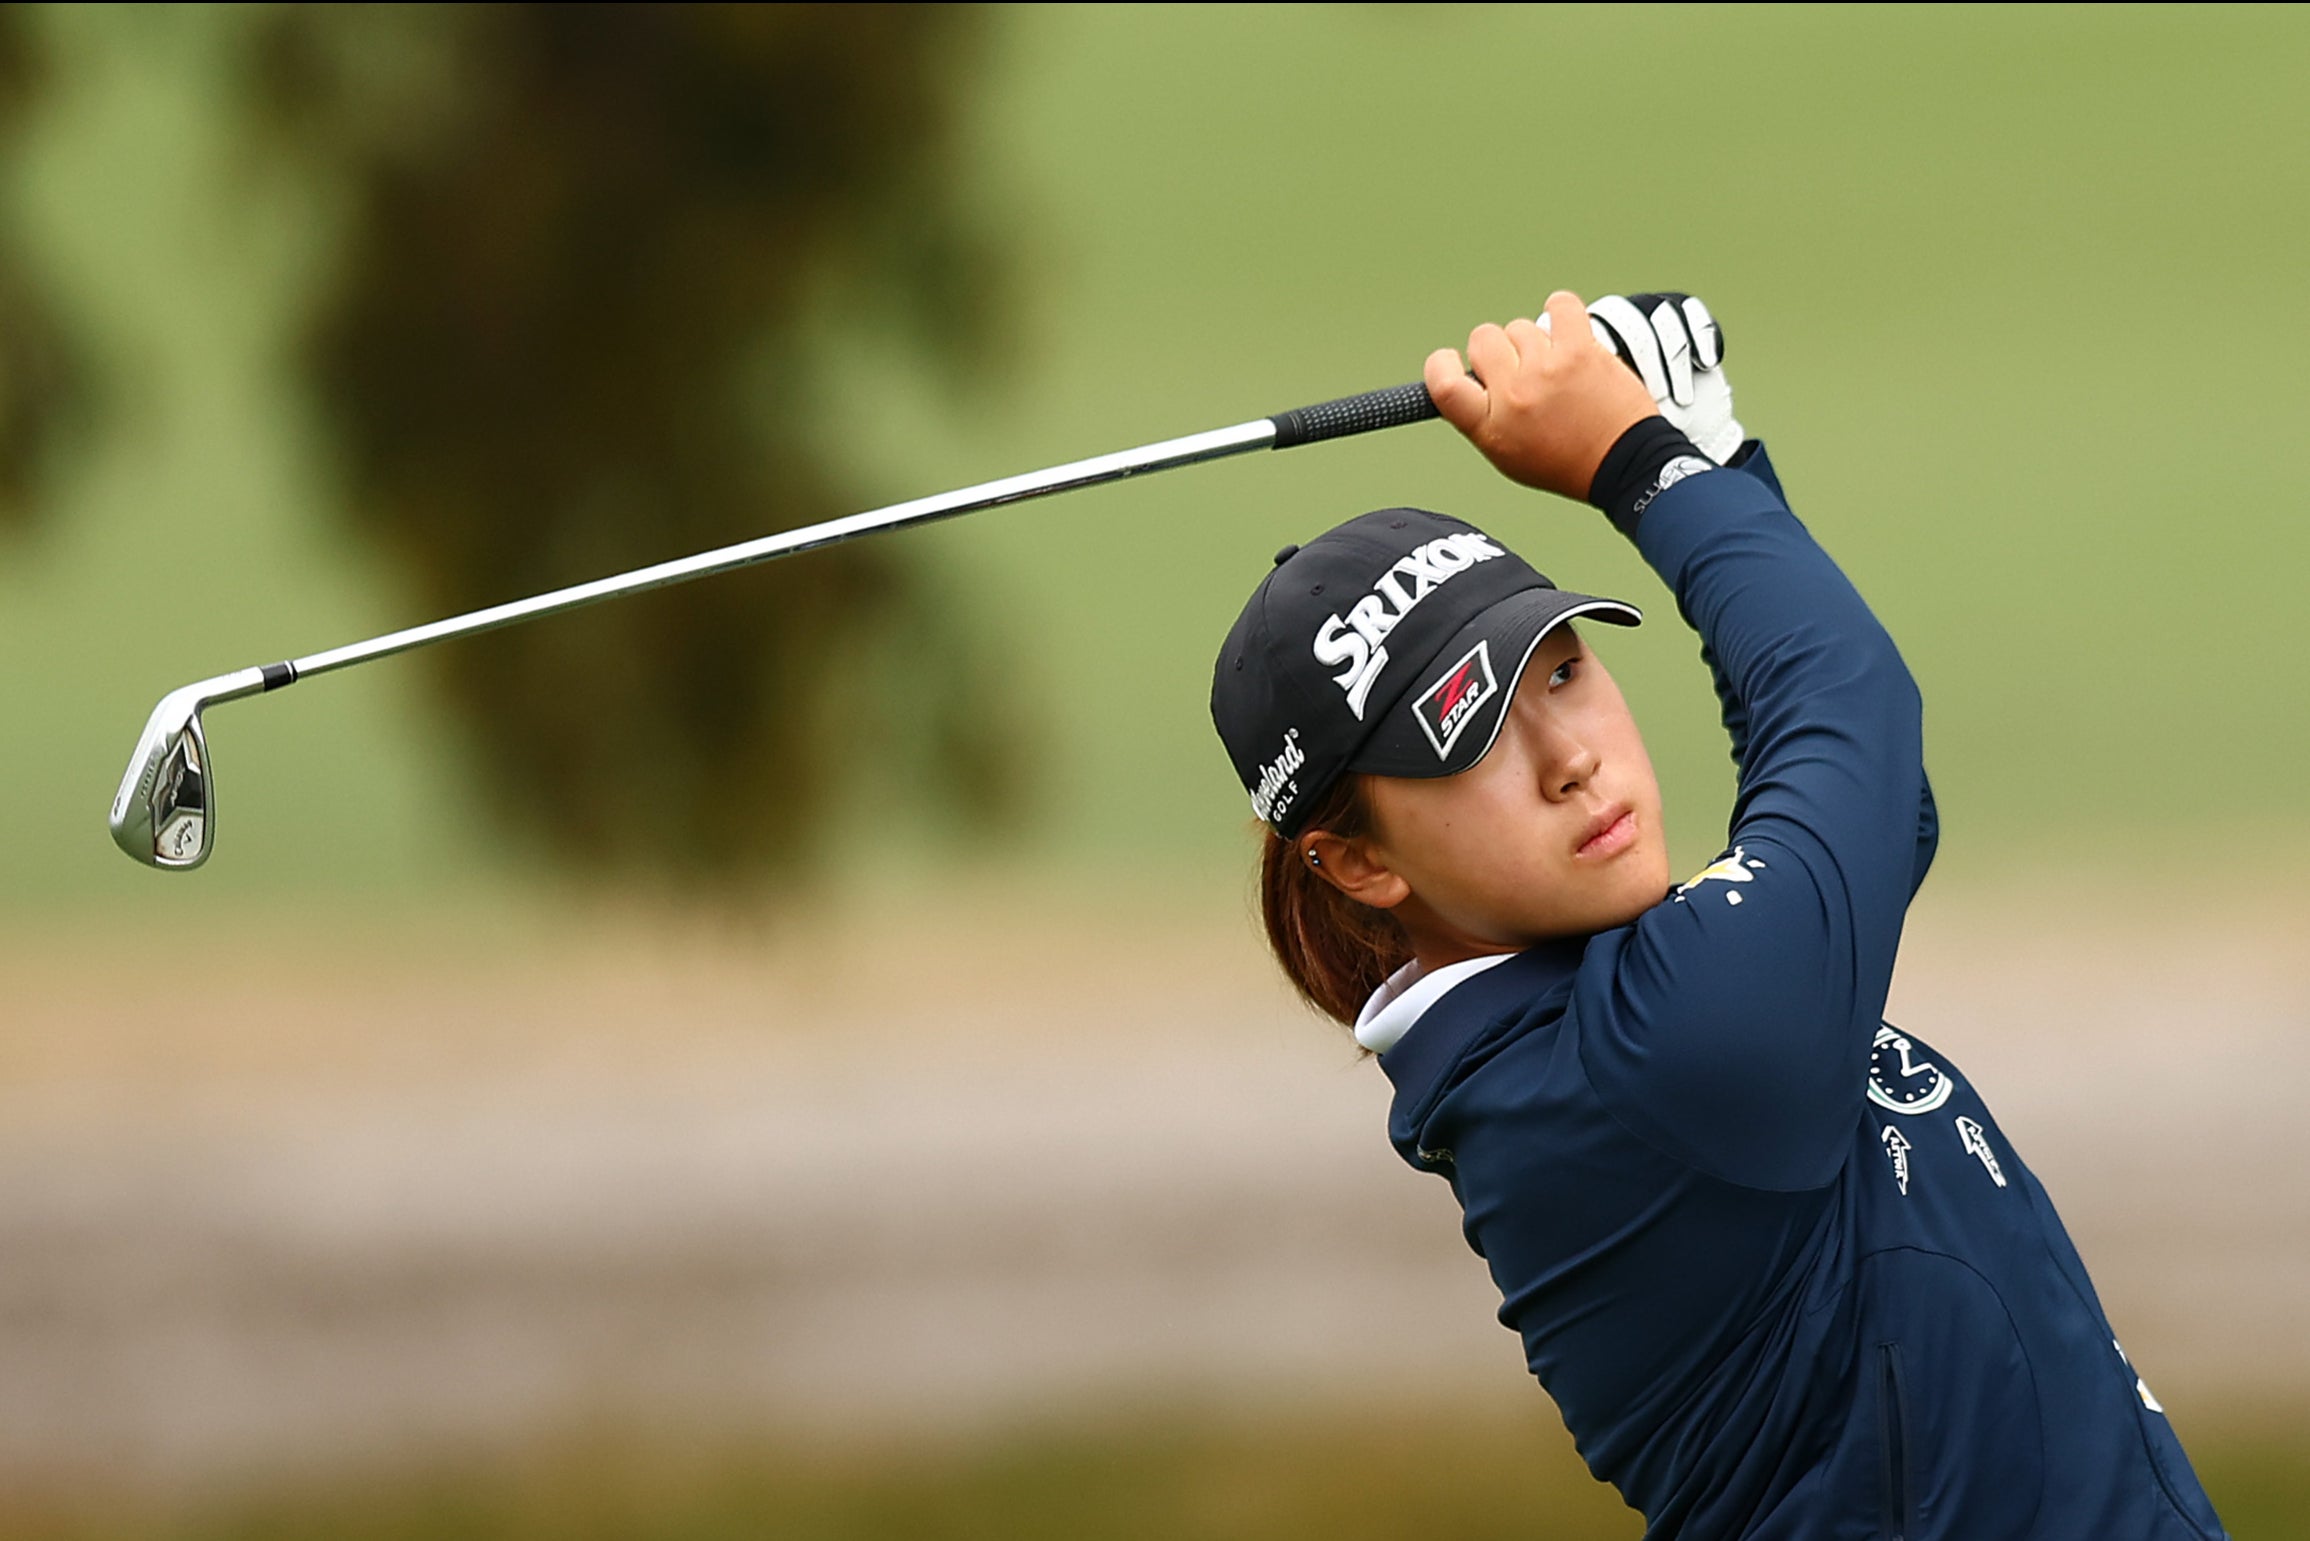 16-year-old Rachel Lee secured a share of the lead in Sydney